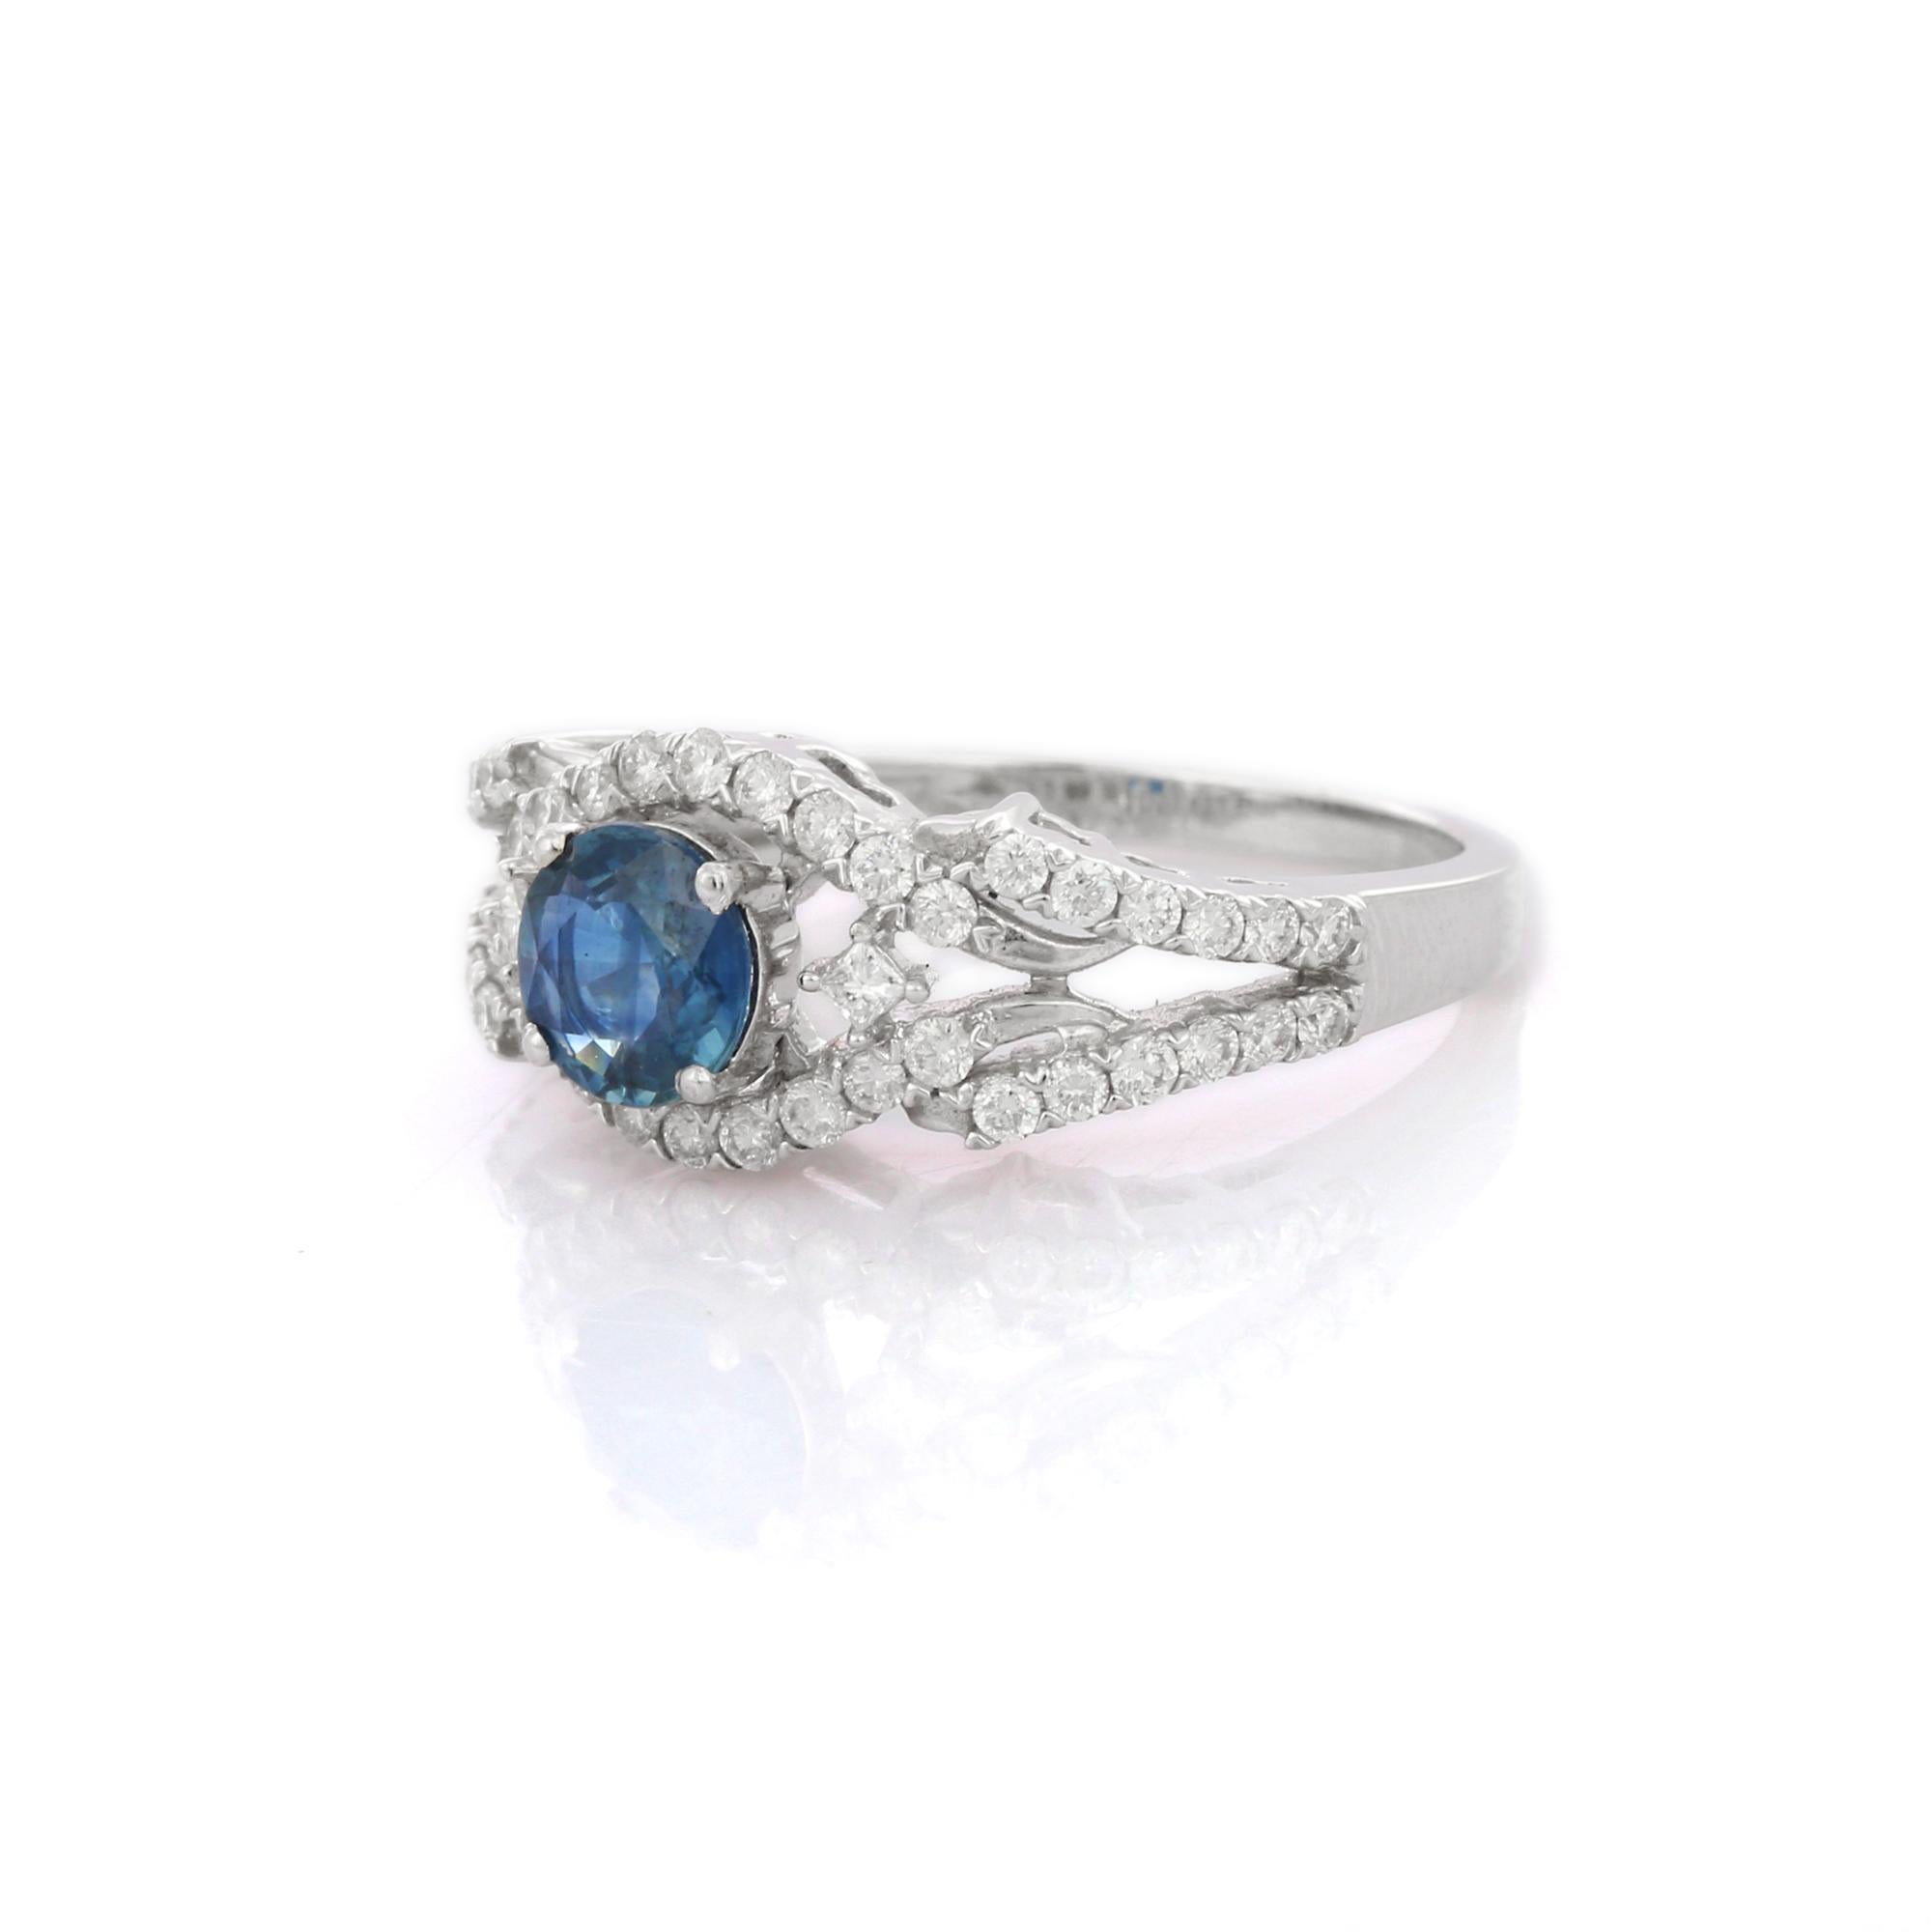 For Sale:  18K White Gold Regal 0.88ct Round Cut Sapphire Diamond Engagement Ring  3